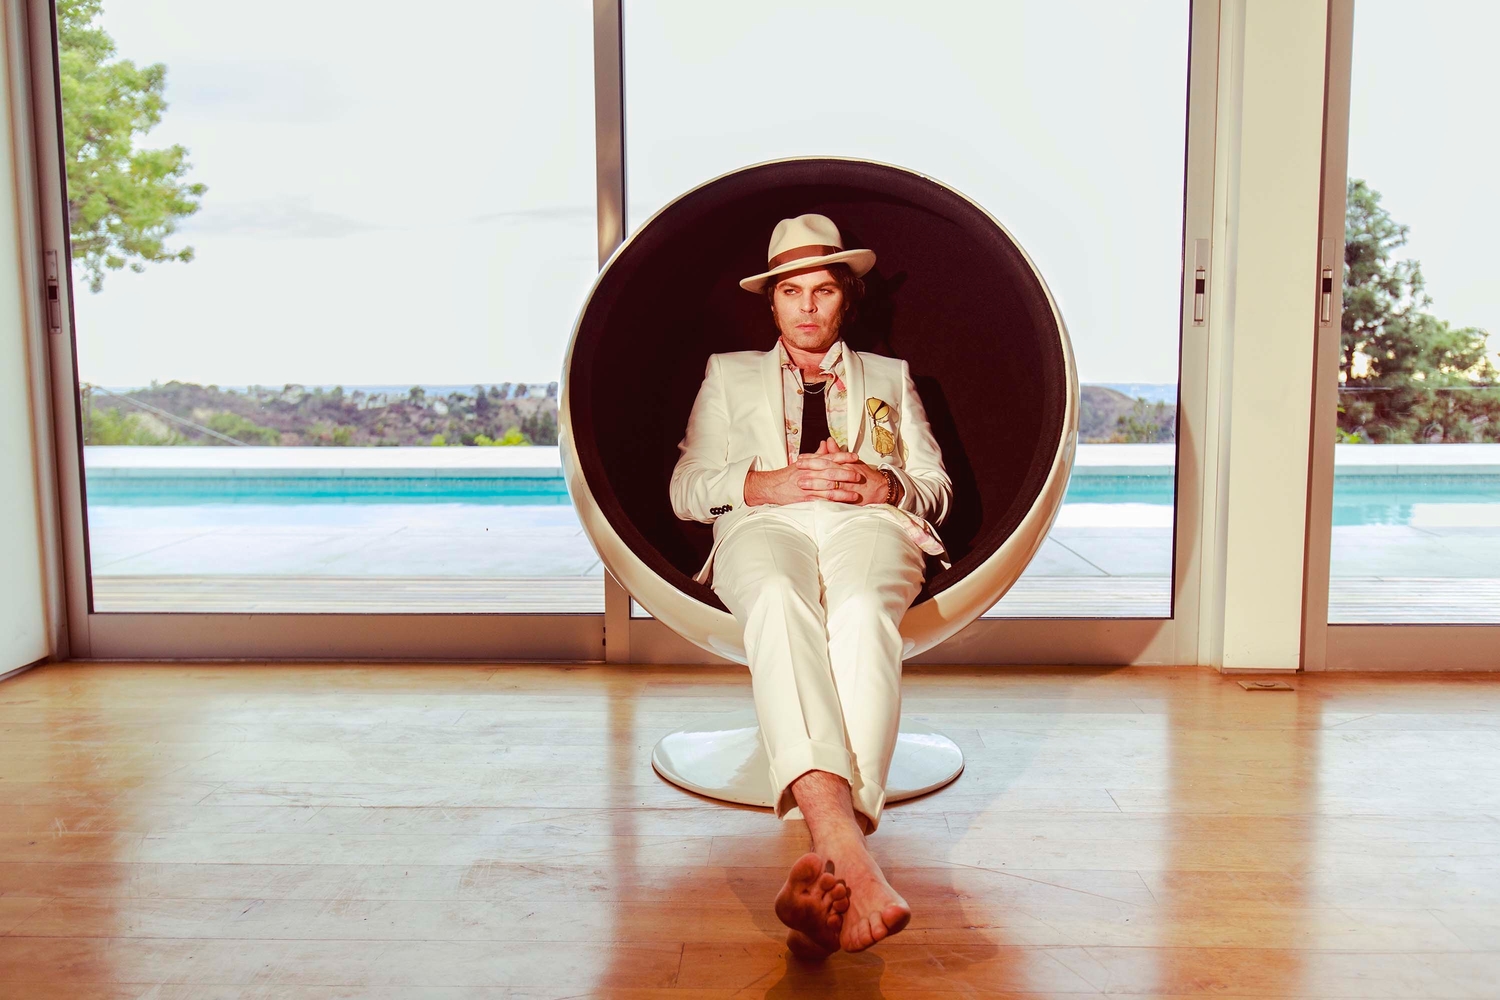 Gaz Coombes unveils his first material of 2019 with new single ‘Salamander’